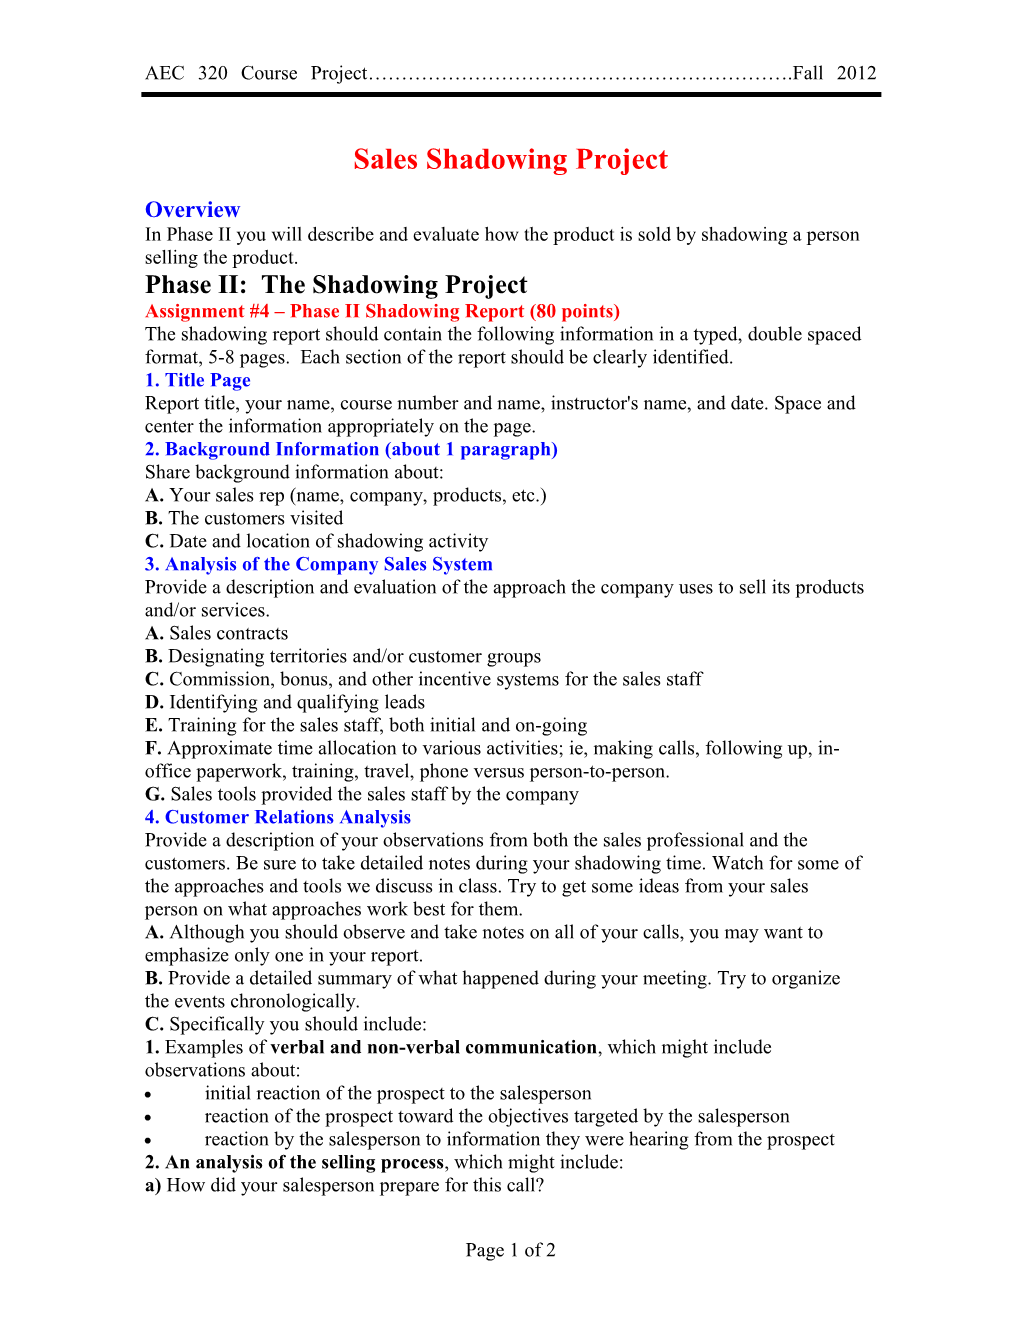 Marketing Evaluation & Sales Shadowing Project